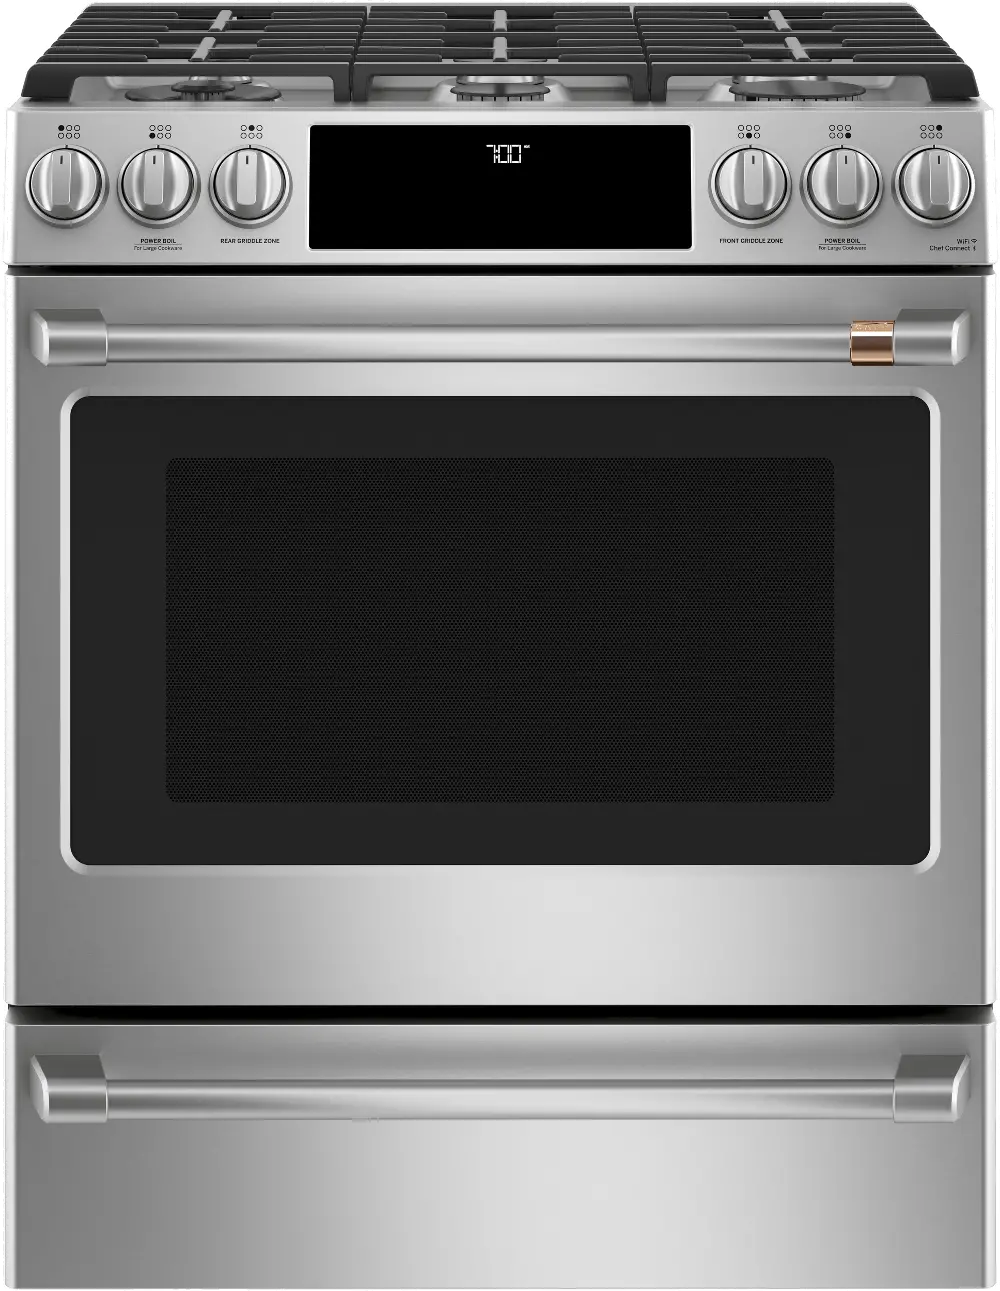 CGS700P2MS1 Cafe 5.6 cu ft Gas Range - Stainless Steel-1